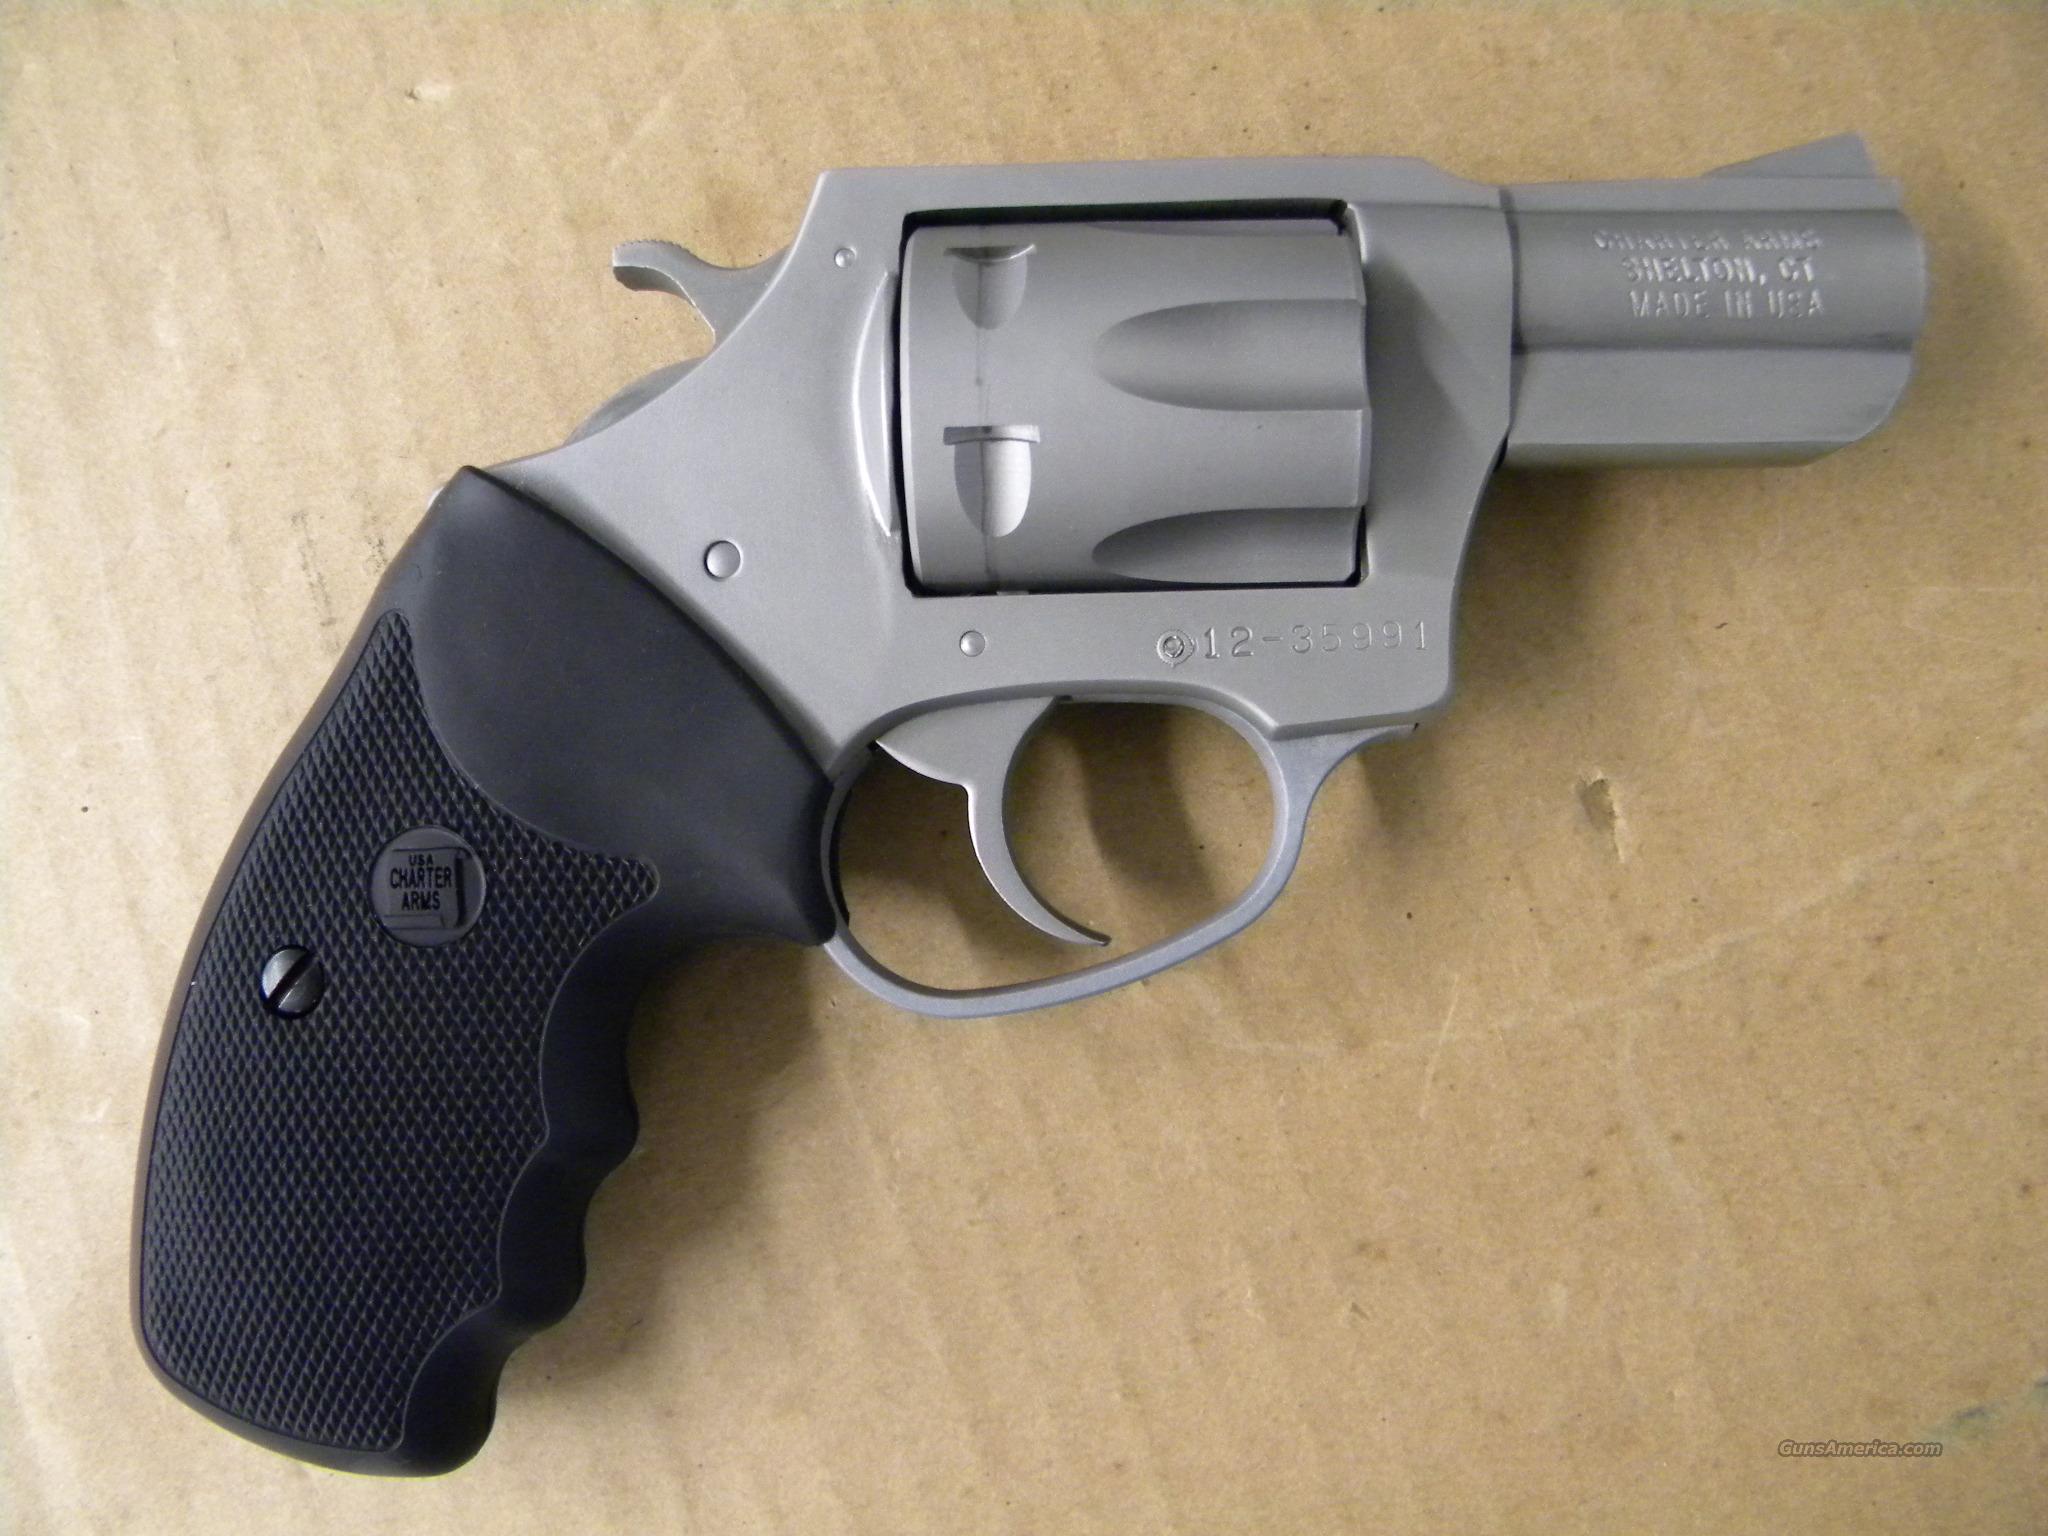 charter arms pitbull 9mm revolver for sale